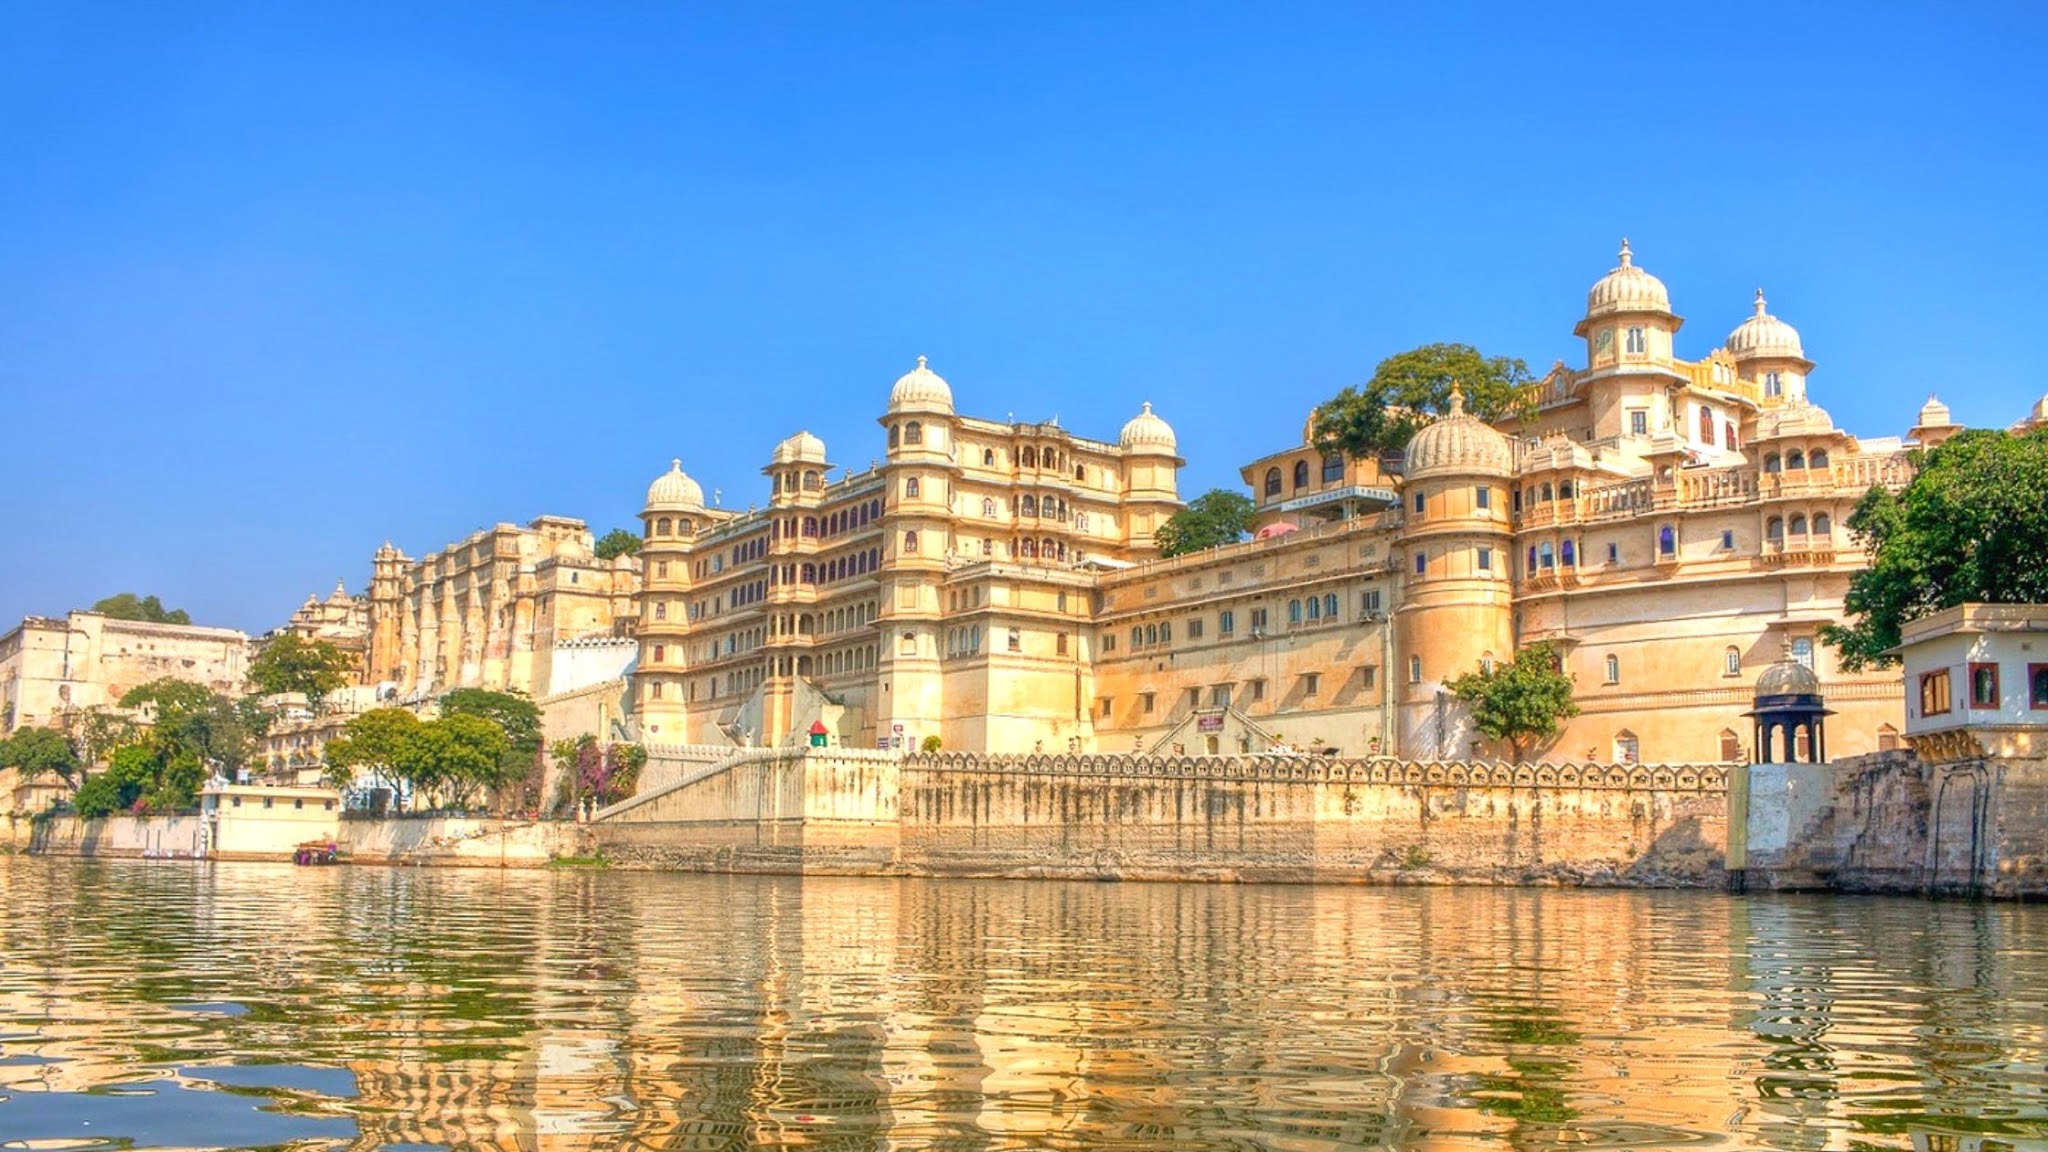 Udaipur - The City of Lakes for a Royal Revival